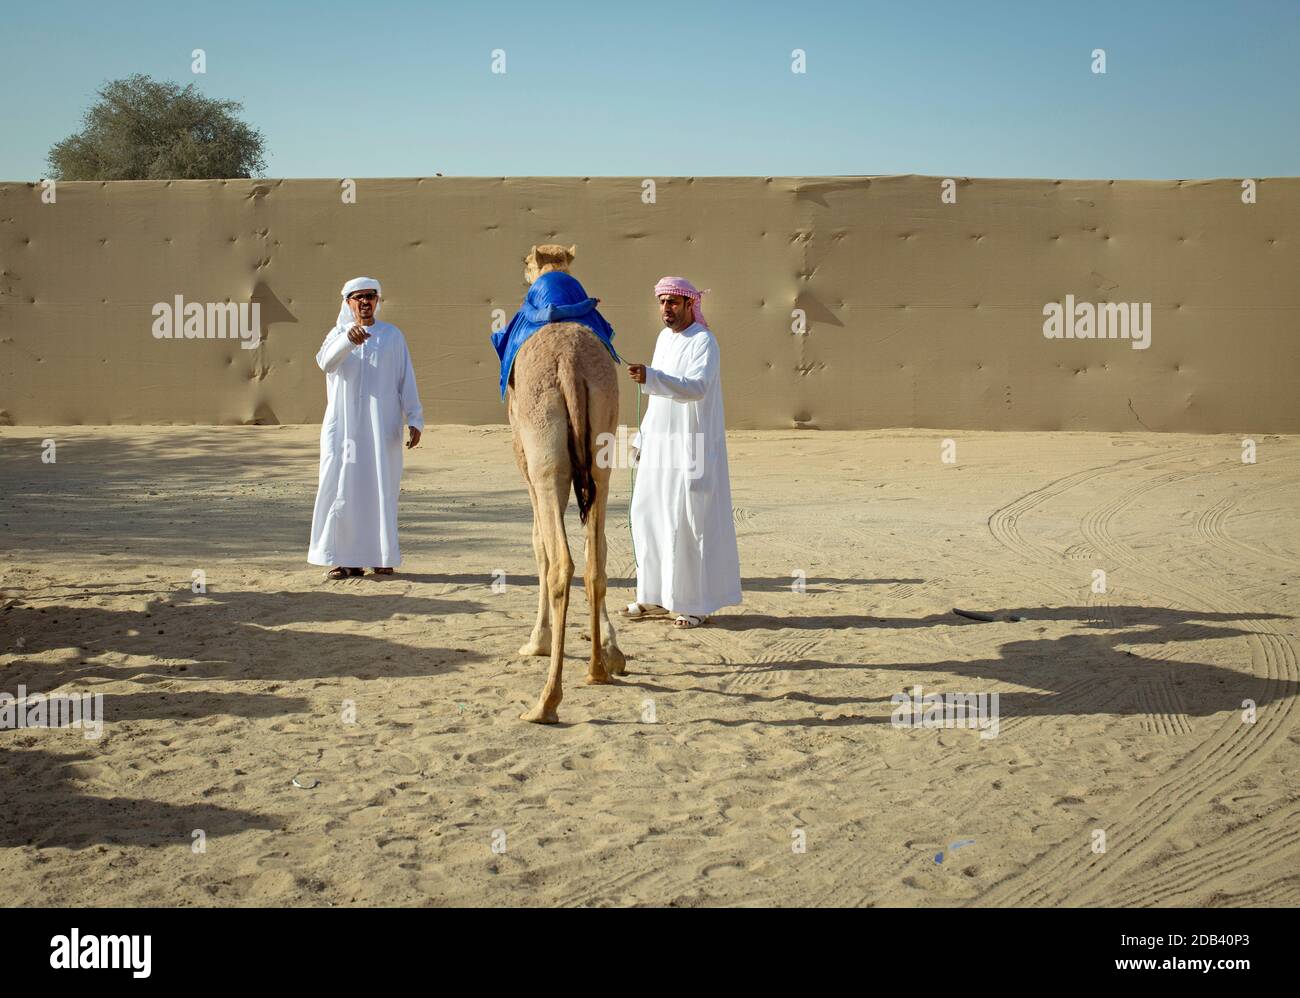 United Arab Emirates / Al Dhaid / Camel owner with his camels, near the camel racing track. Stock Photo